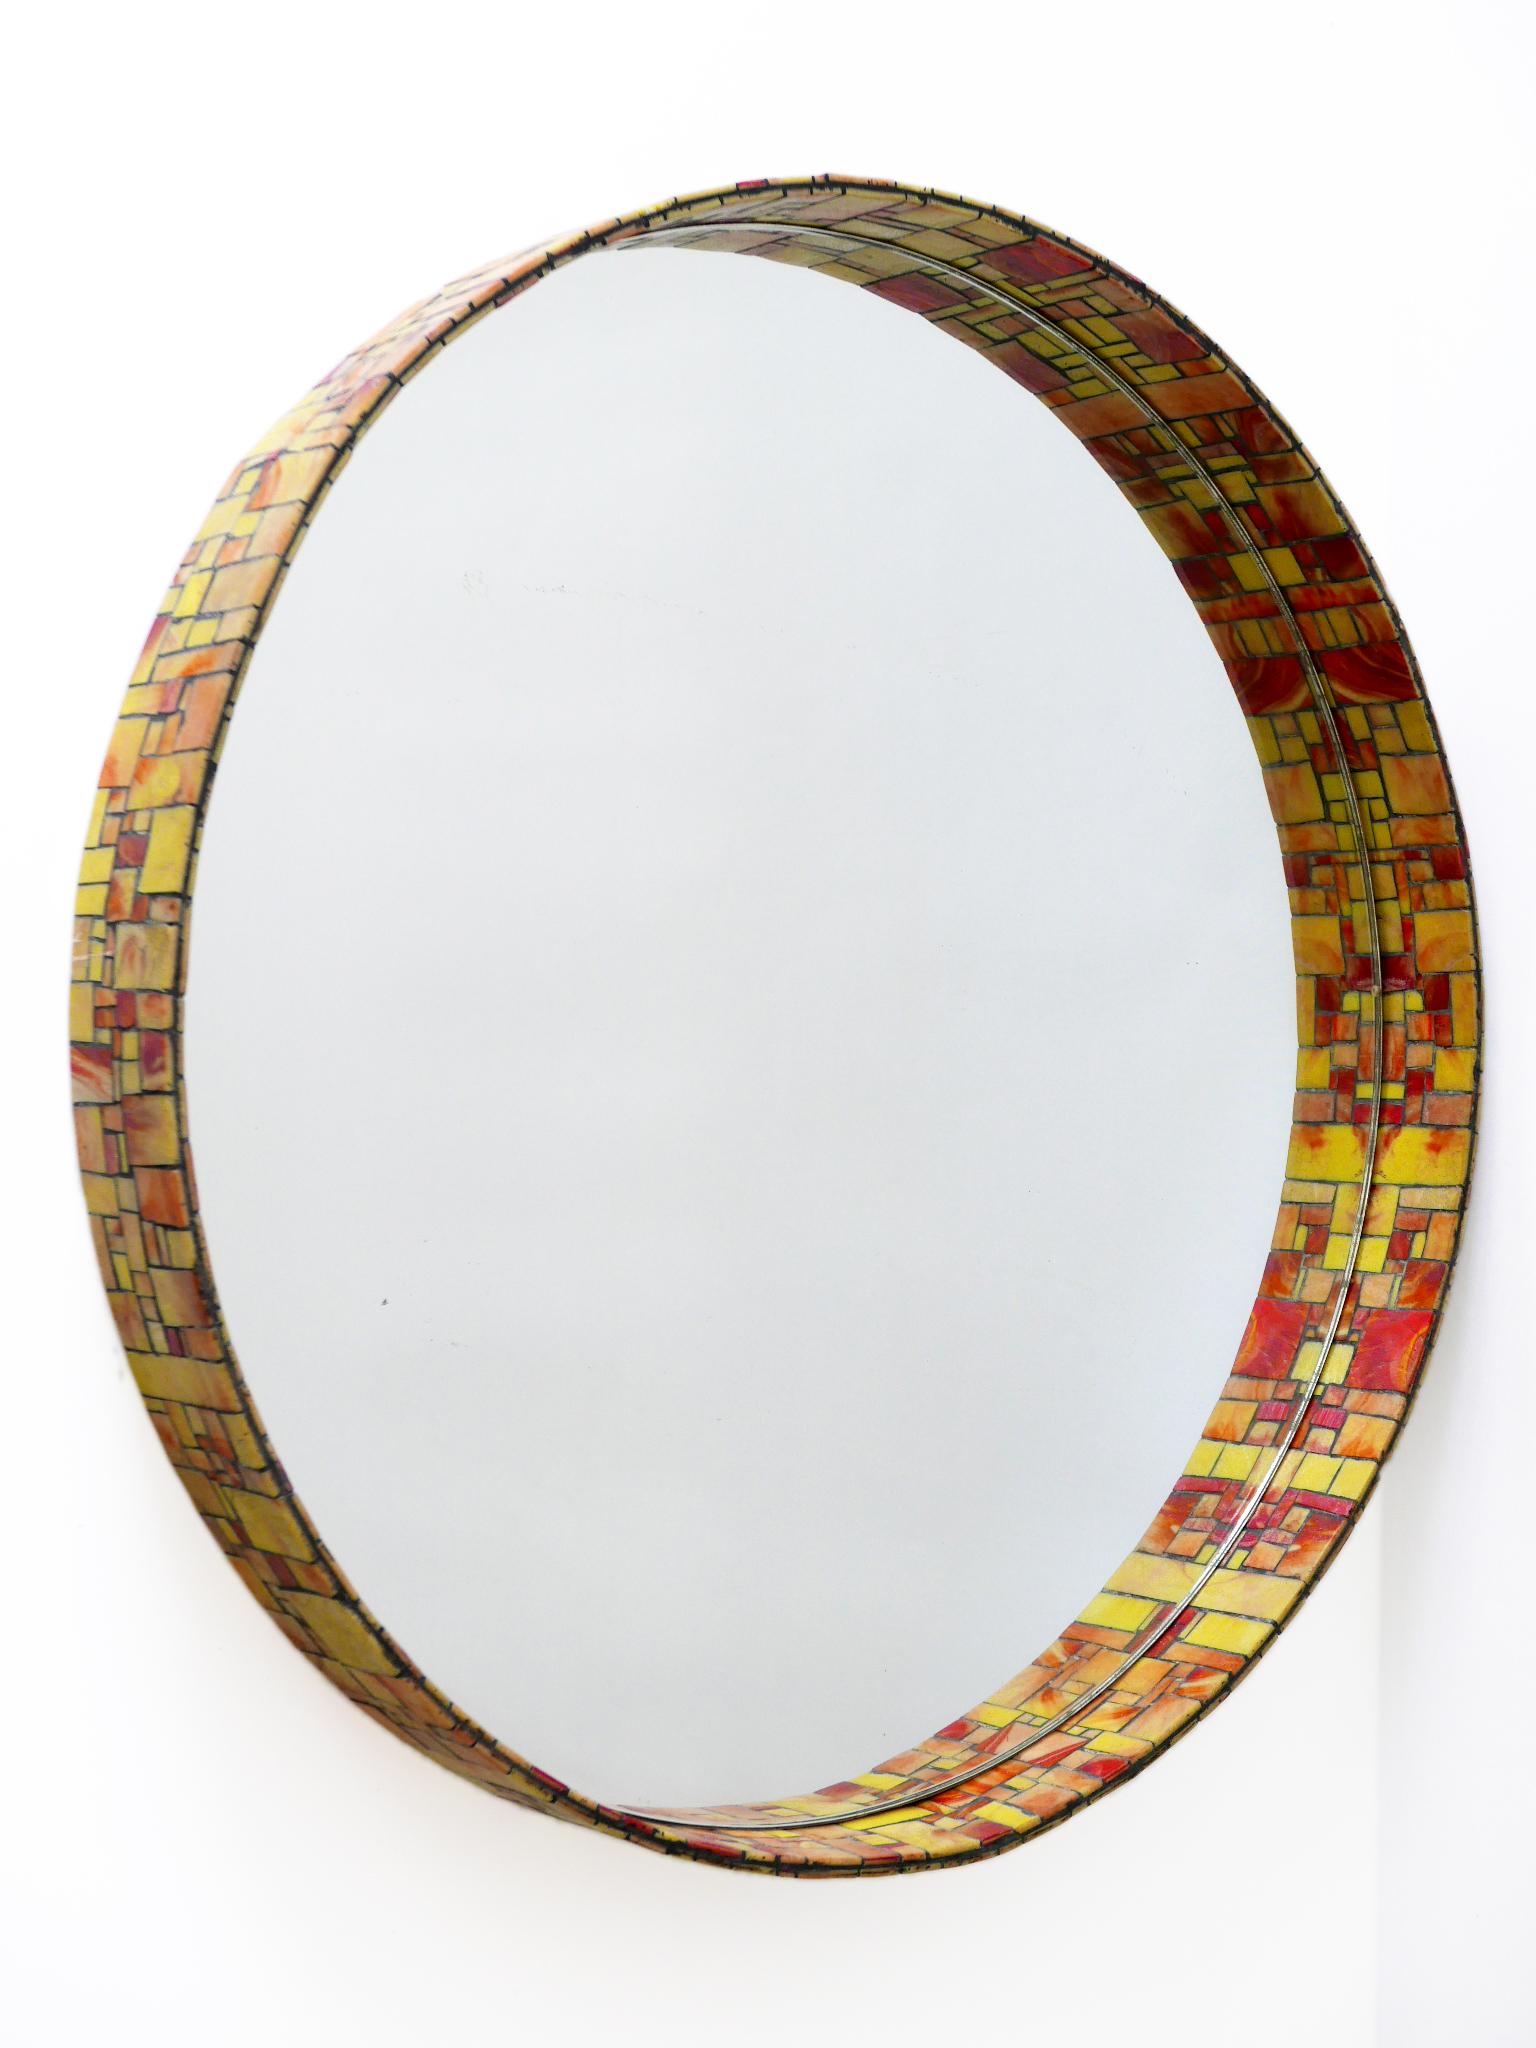 Exceptional Mid-Century Modern Mosaic Framed Circular Wall Mirror, Italy, 1960s For Sale 5